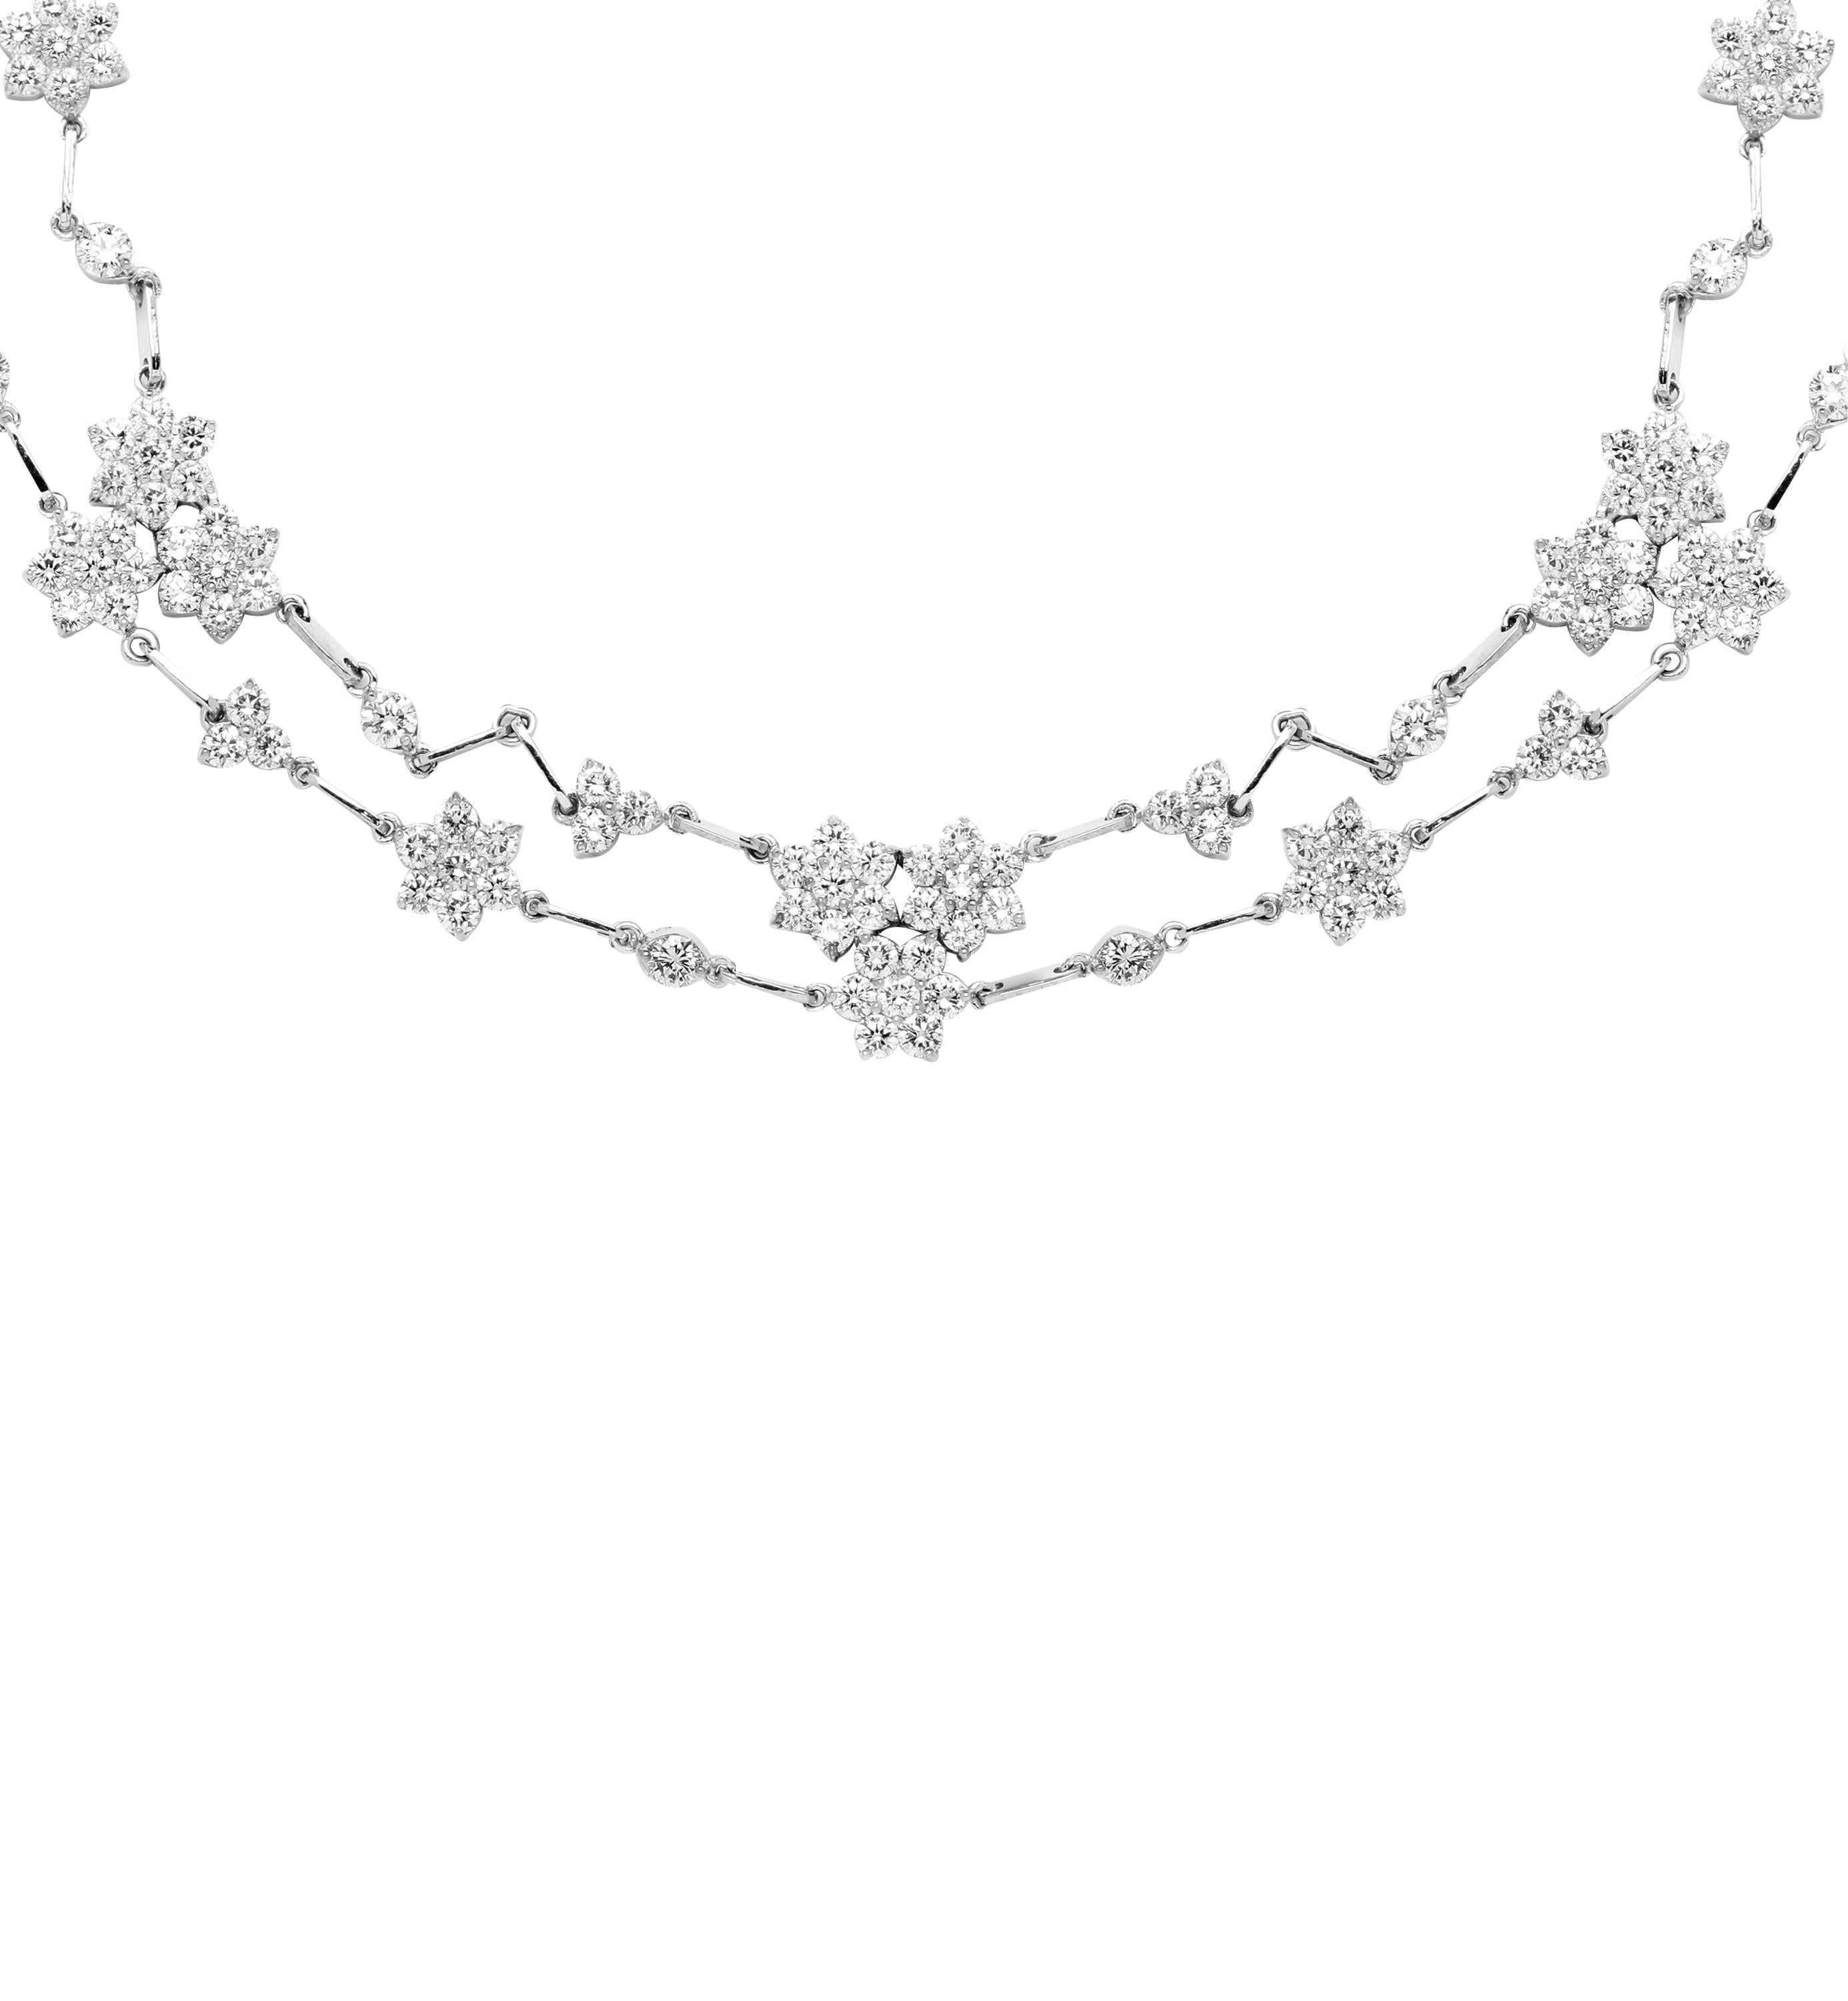 IF YOU ARE REALLY INTERESTED, CONTACT US WITH ANY REASONABLE OFFER. WE WILL TRY OUR BEST TO MAKE YOU HAPPY!

18K White Gold and Diamond Choker Necklace by Stambolian'

This elegant masterpiece is one of the incredible designs by the Stambolian